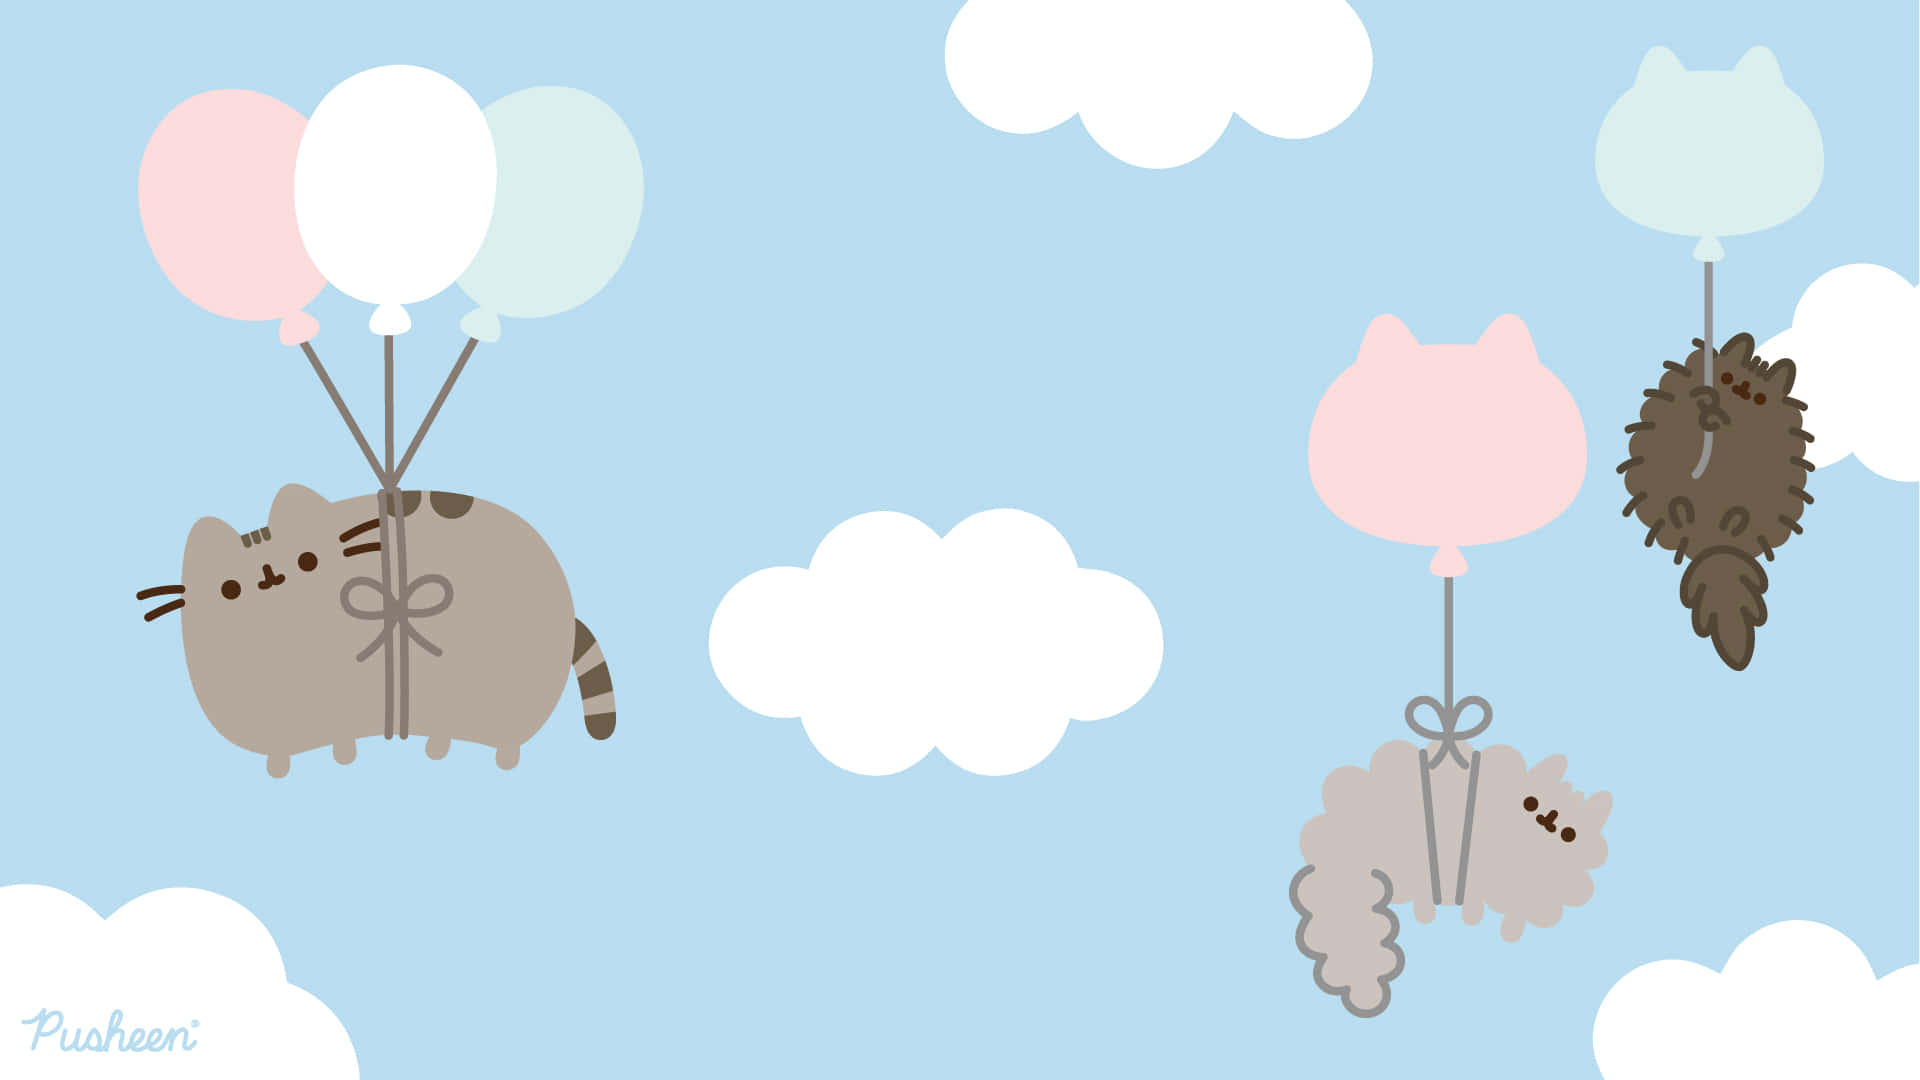 Pusheen Cat Flying In The Sky With Balloons Wallpaper